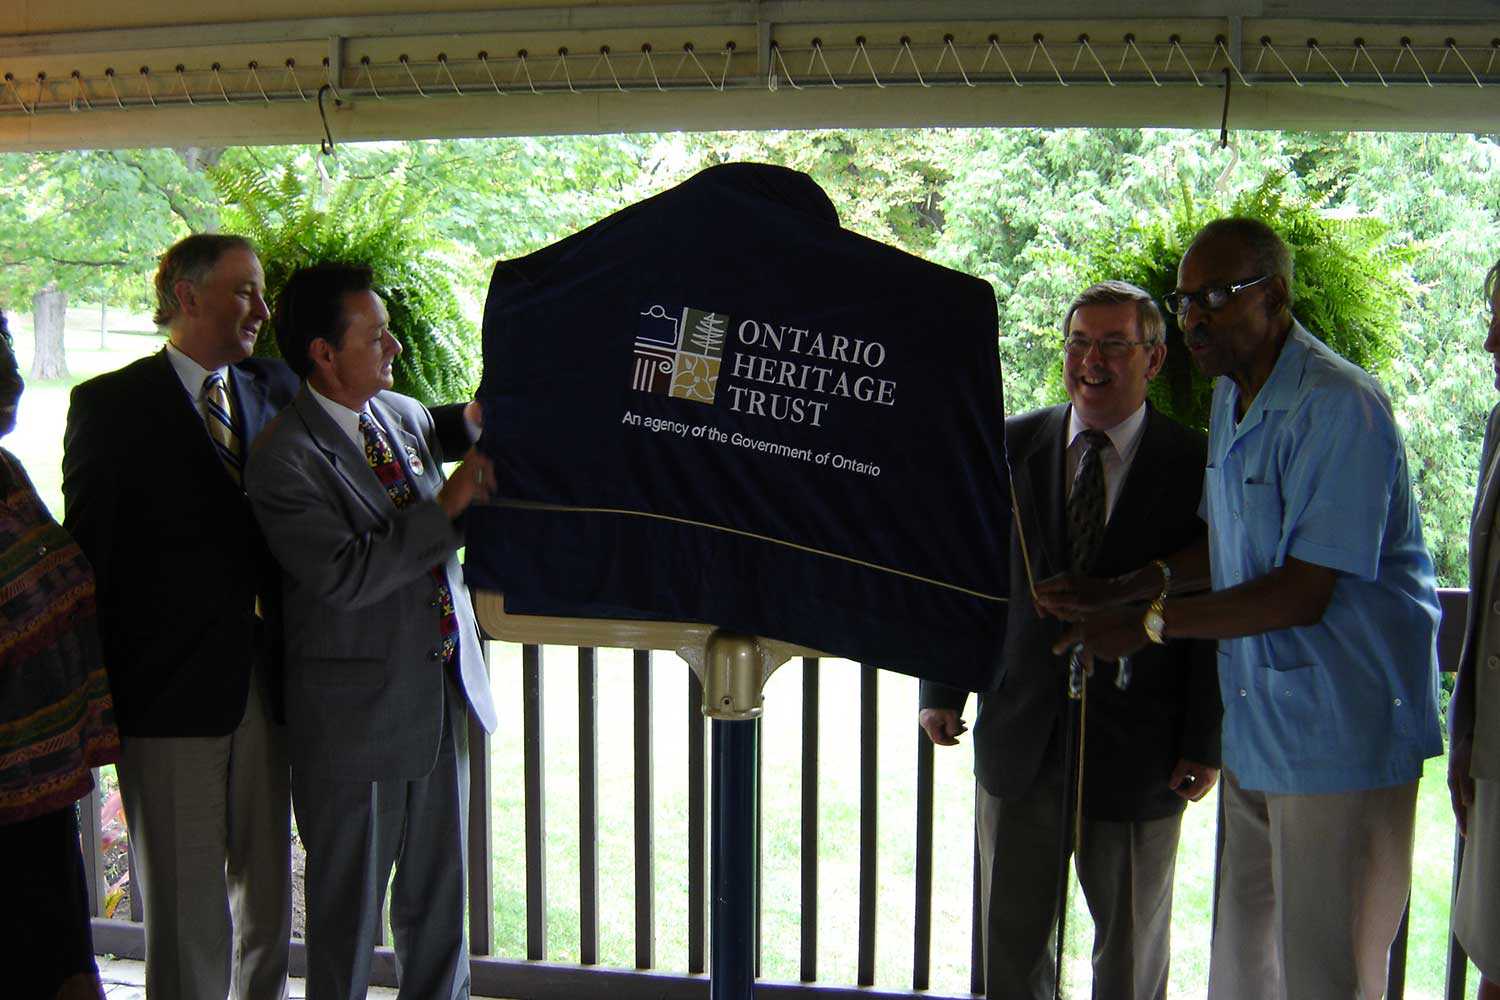 On August 23, 2007, this provincial plaque was unveiled to commemorate Chloe Cooley and the 1793 Act to Limit Slavery in Upper Canada. The plaque was unveiled by The Honourable Lincoln M. Alexander, then-Chairman of the Ontario Heritage Trust.